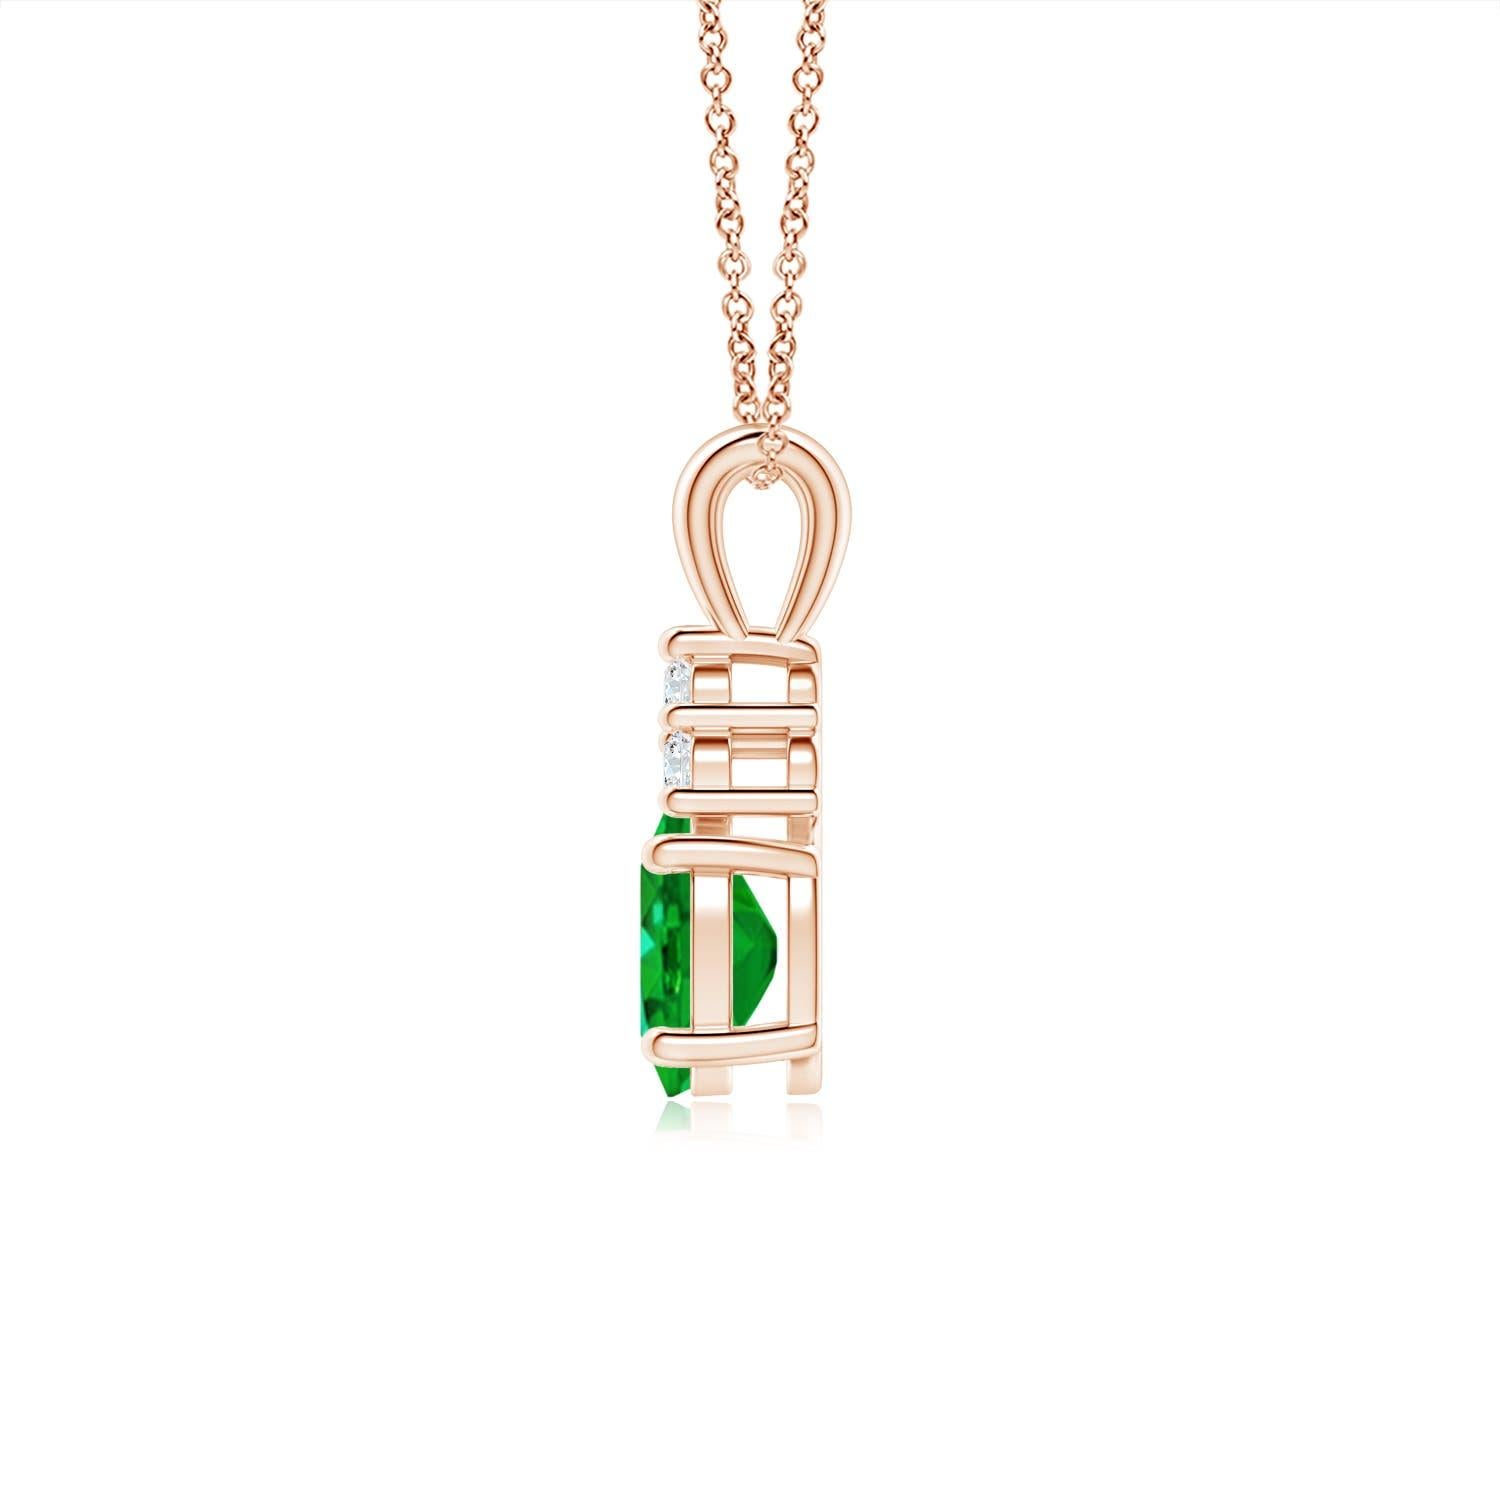 Set in 14k rose gold, this classic solitaire emerald pendant showcases the perfect blend of style and elegance. It features a lush green emerald adorned with three sparkling round diamonds on the top. Linked to a lustrous v-bale, this four-prong set